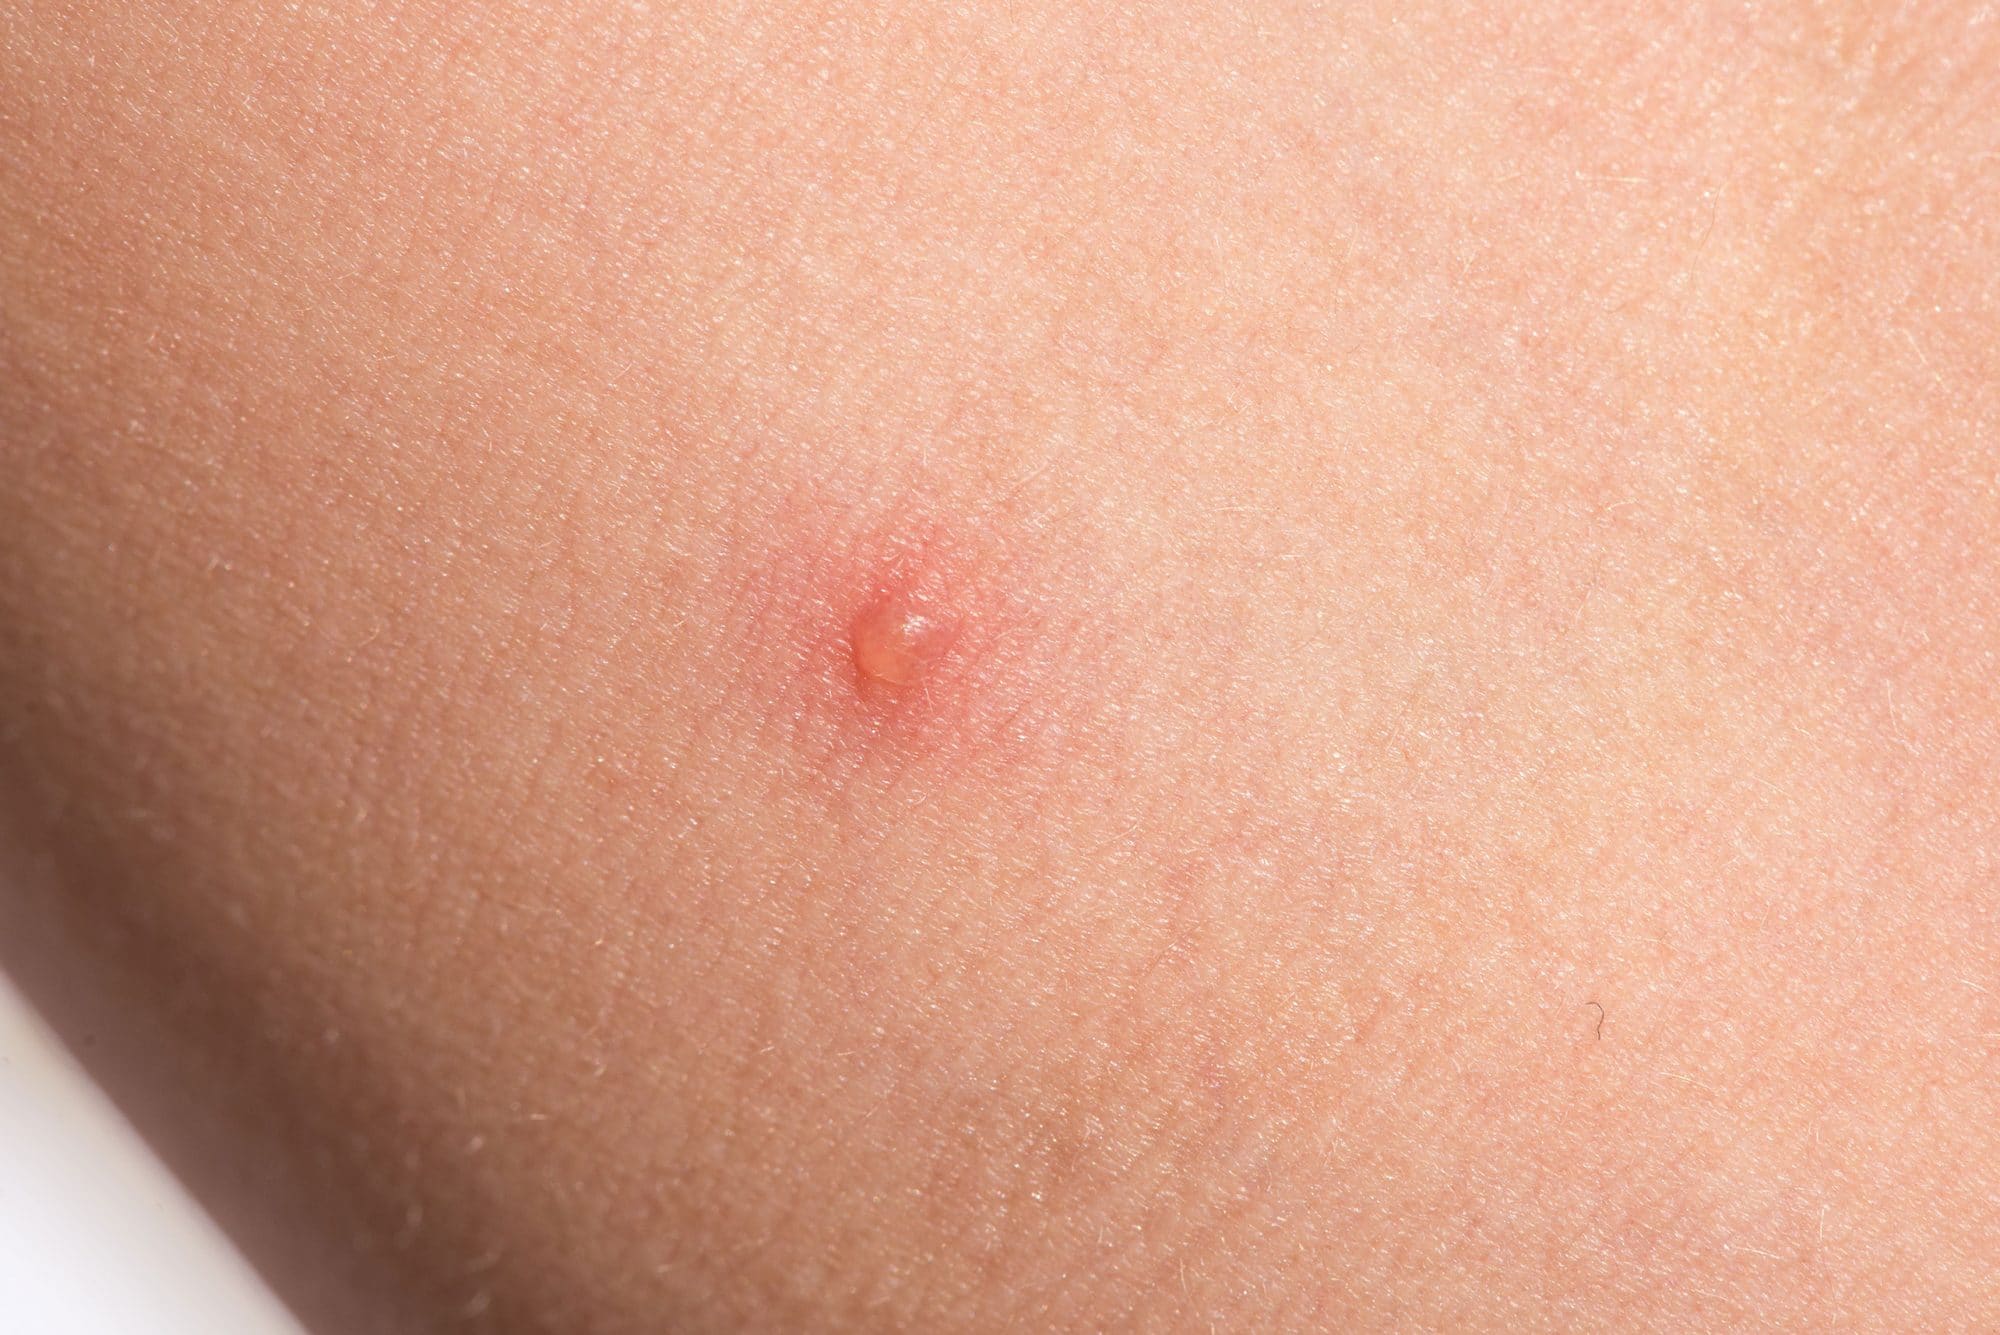 bug bites that itch and blister